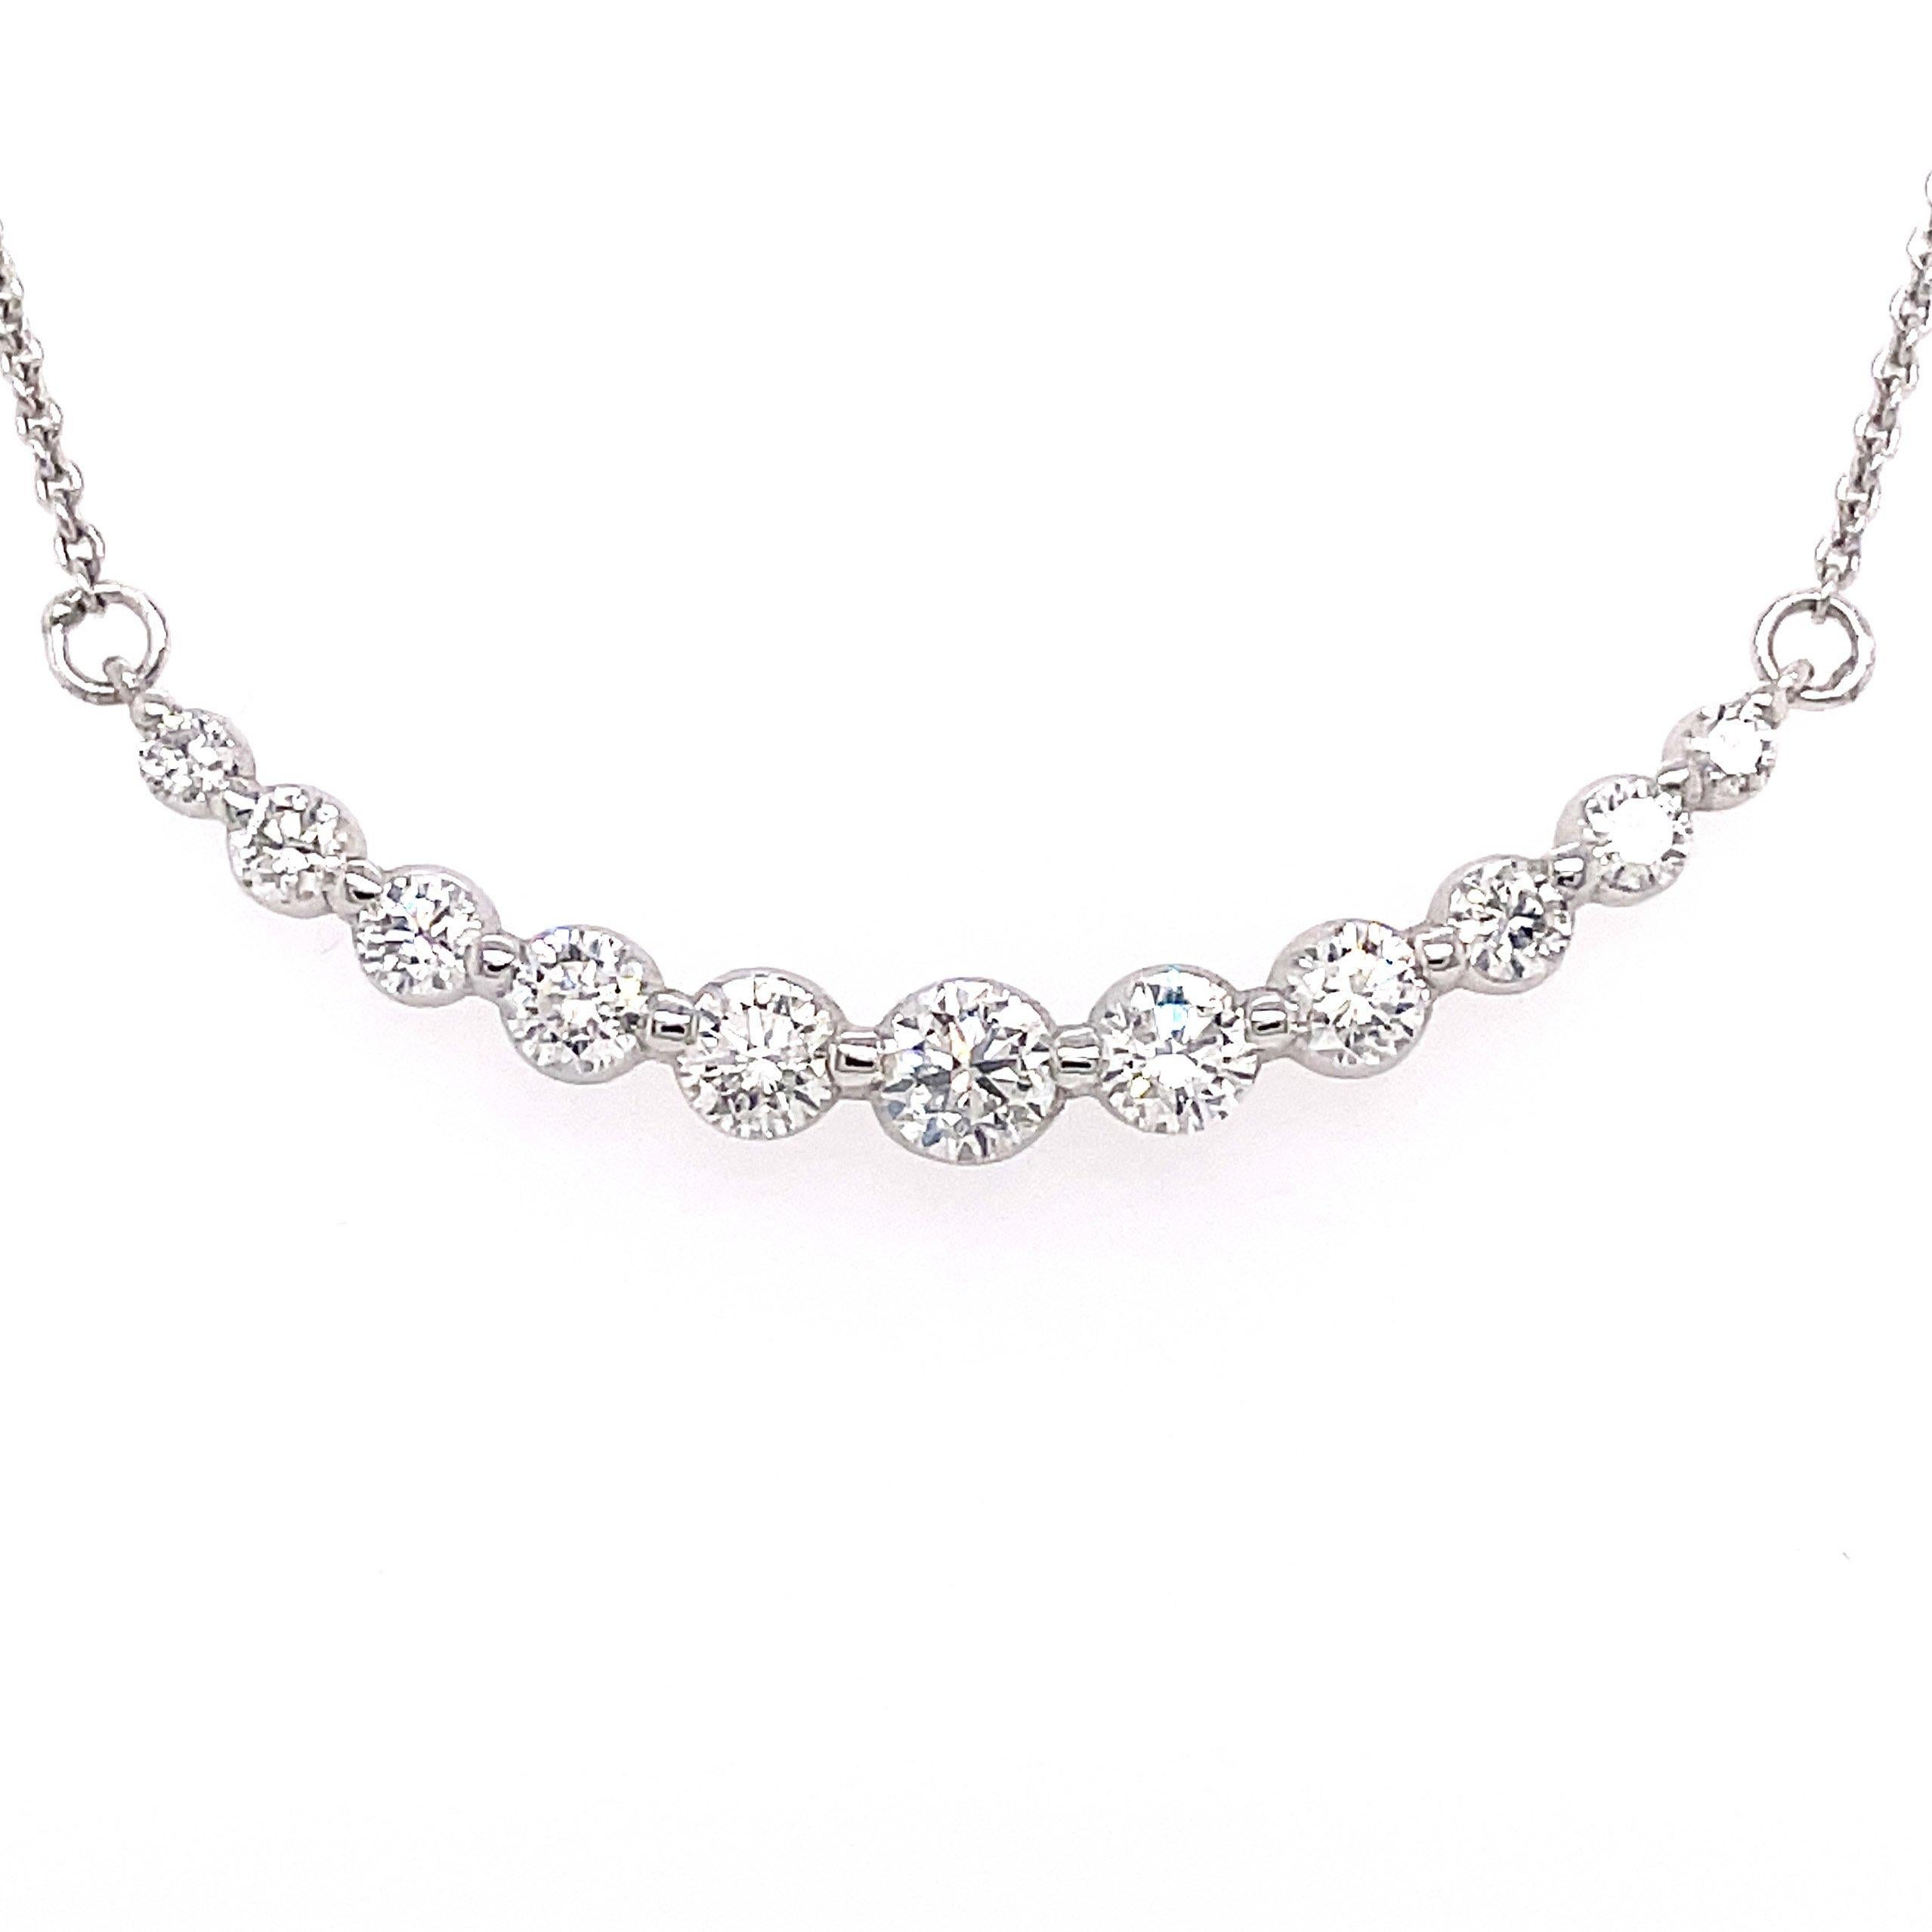 0.75 Carat Eleven Diamond Graduated Necklace in 18K White Gold

Simple yet elegant graduated diamond necklace in white gold. It's a beautiful, chic necklace that is so versatile it'll go with a large part of your wardrobe.

Specifications:
-18K